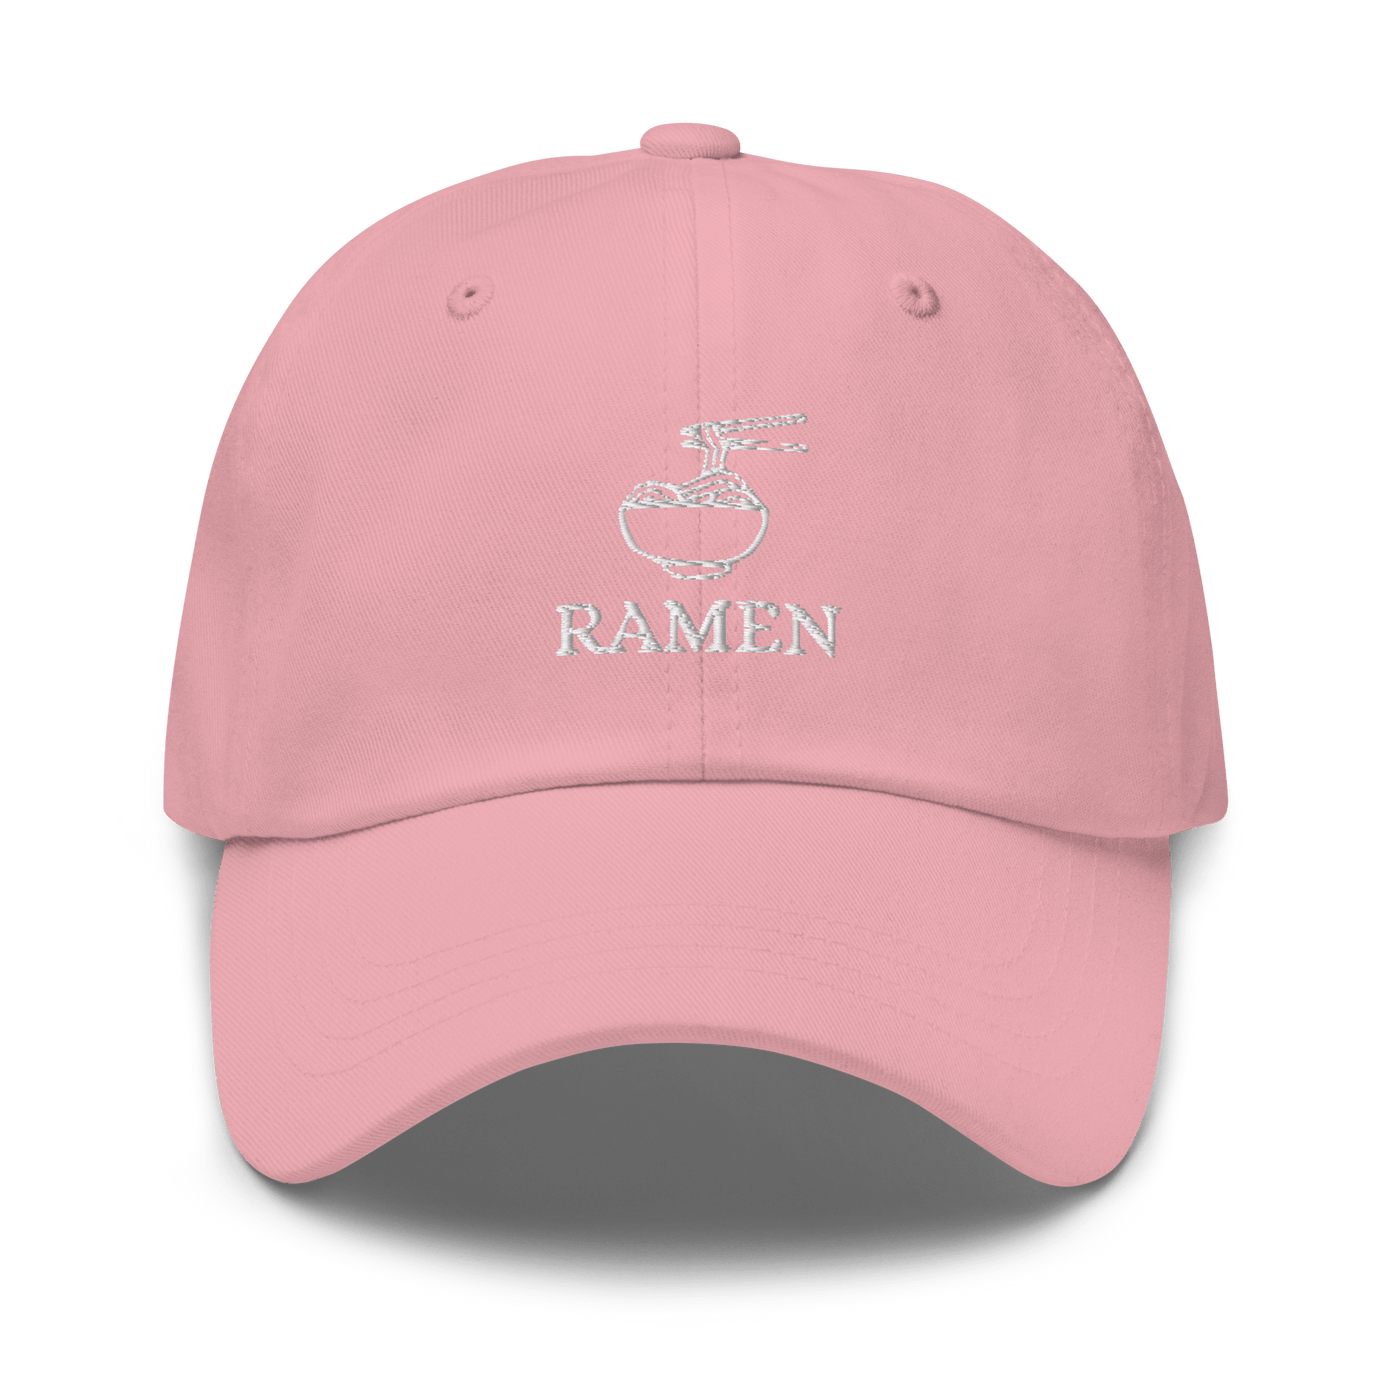 Ramen Bowl Dad hat - Pink - - Just Another Cap Store